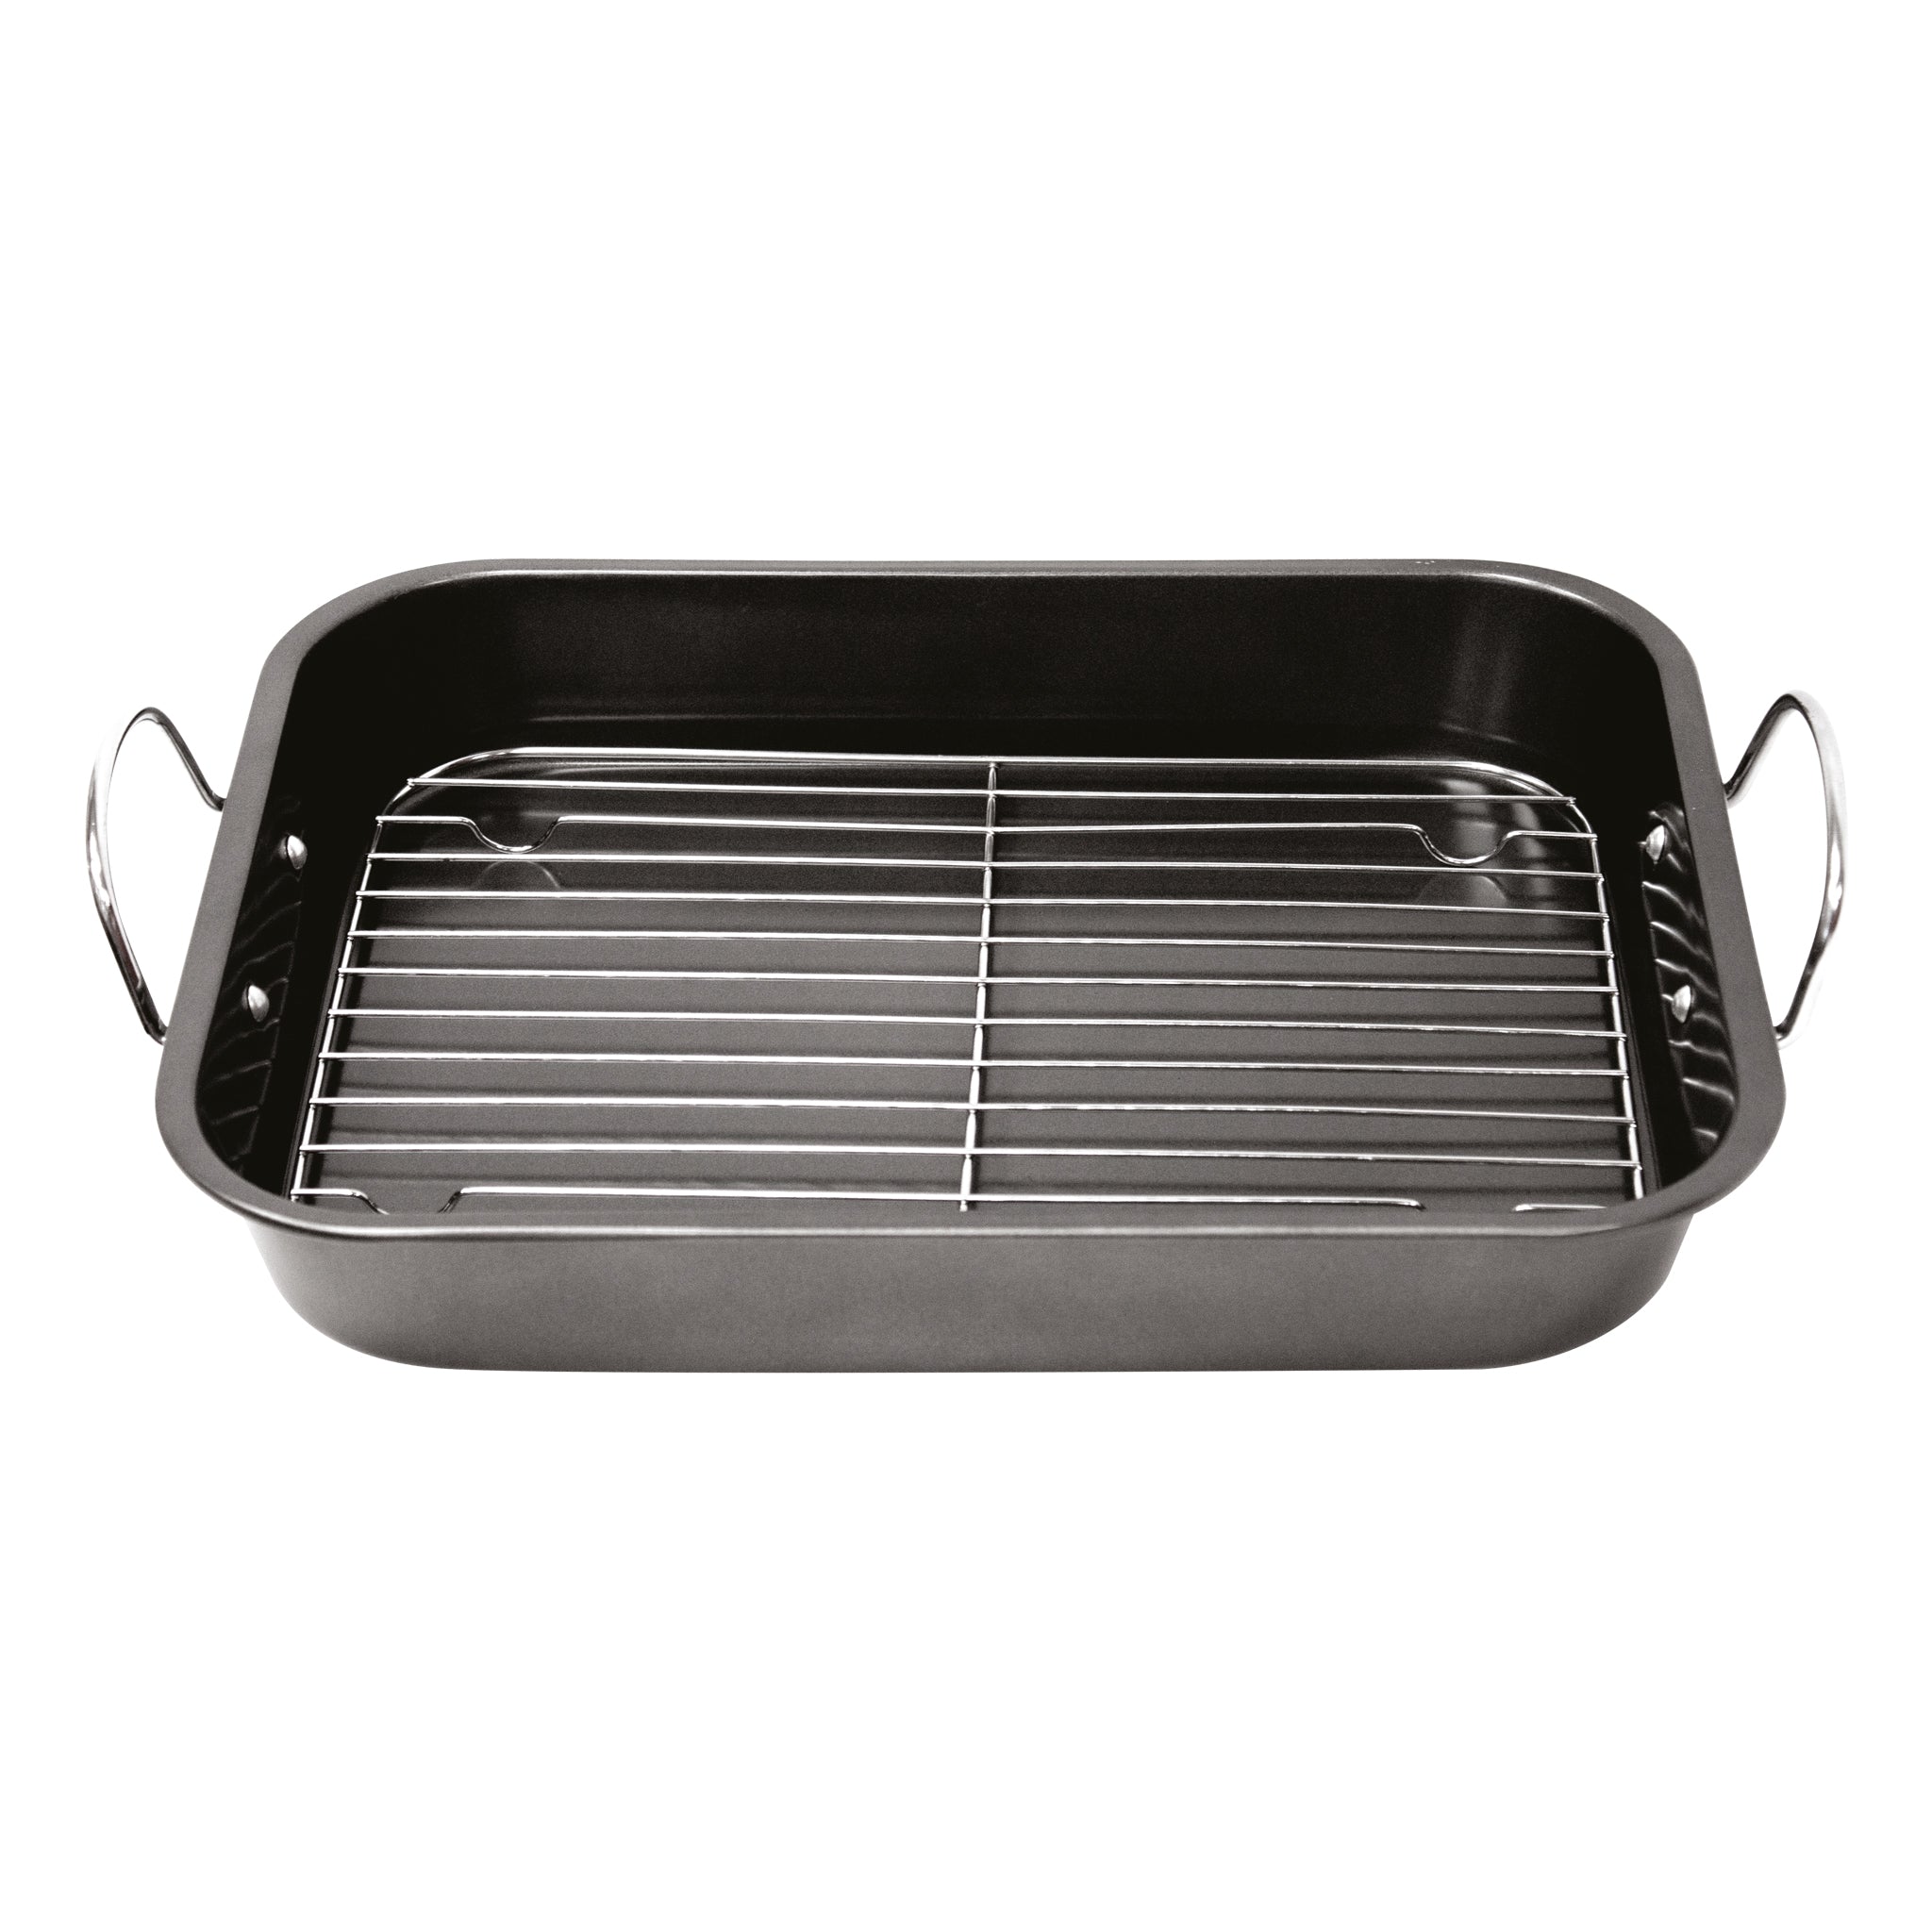 Roasting Tray With Grill